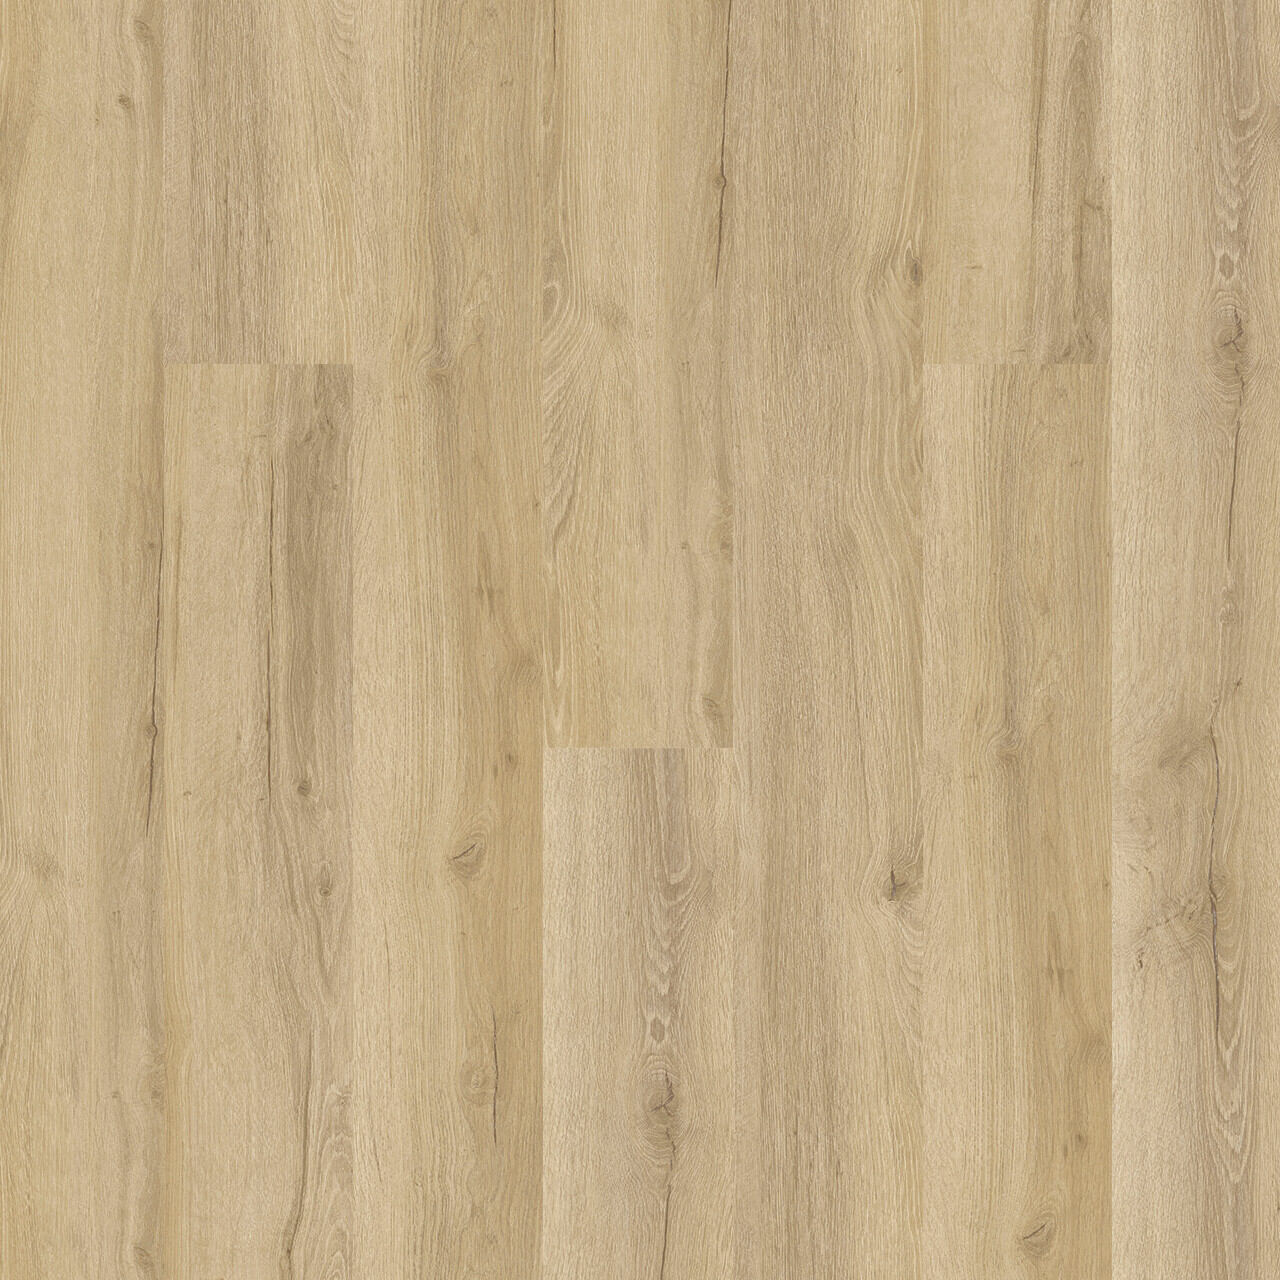 Engineered Floors - Triumph Collection - New Standard Plus - 7 in. x 48 in. - Rio